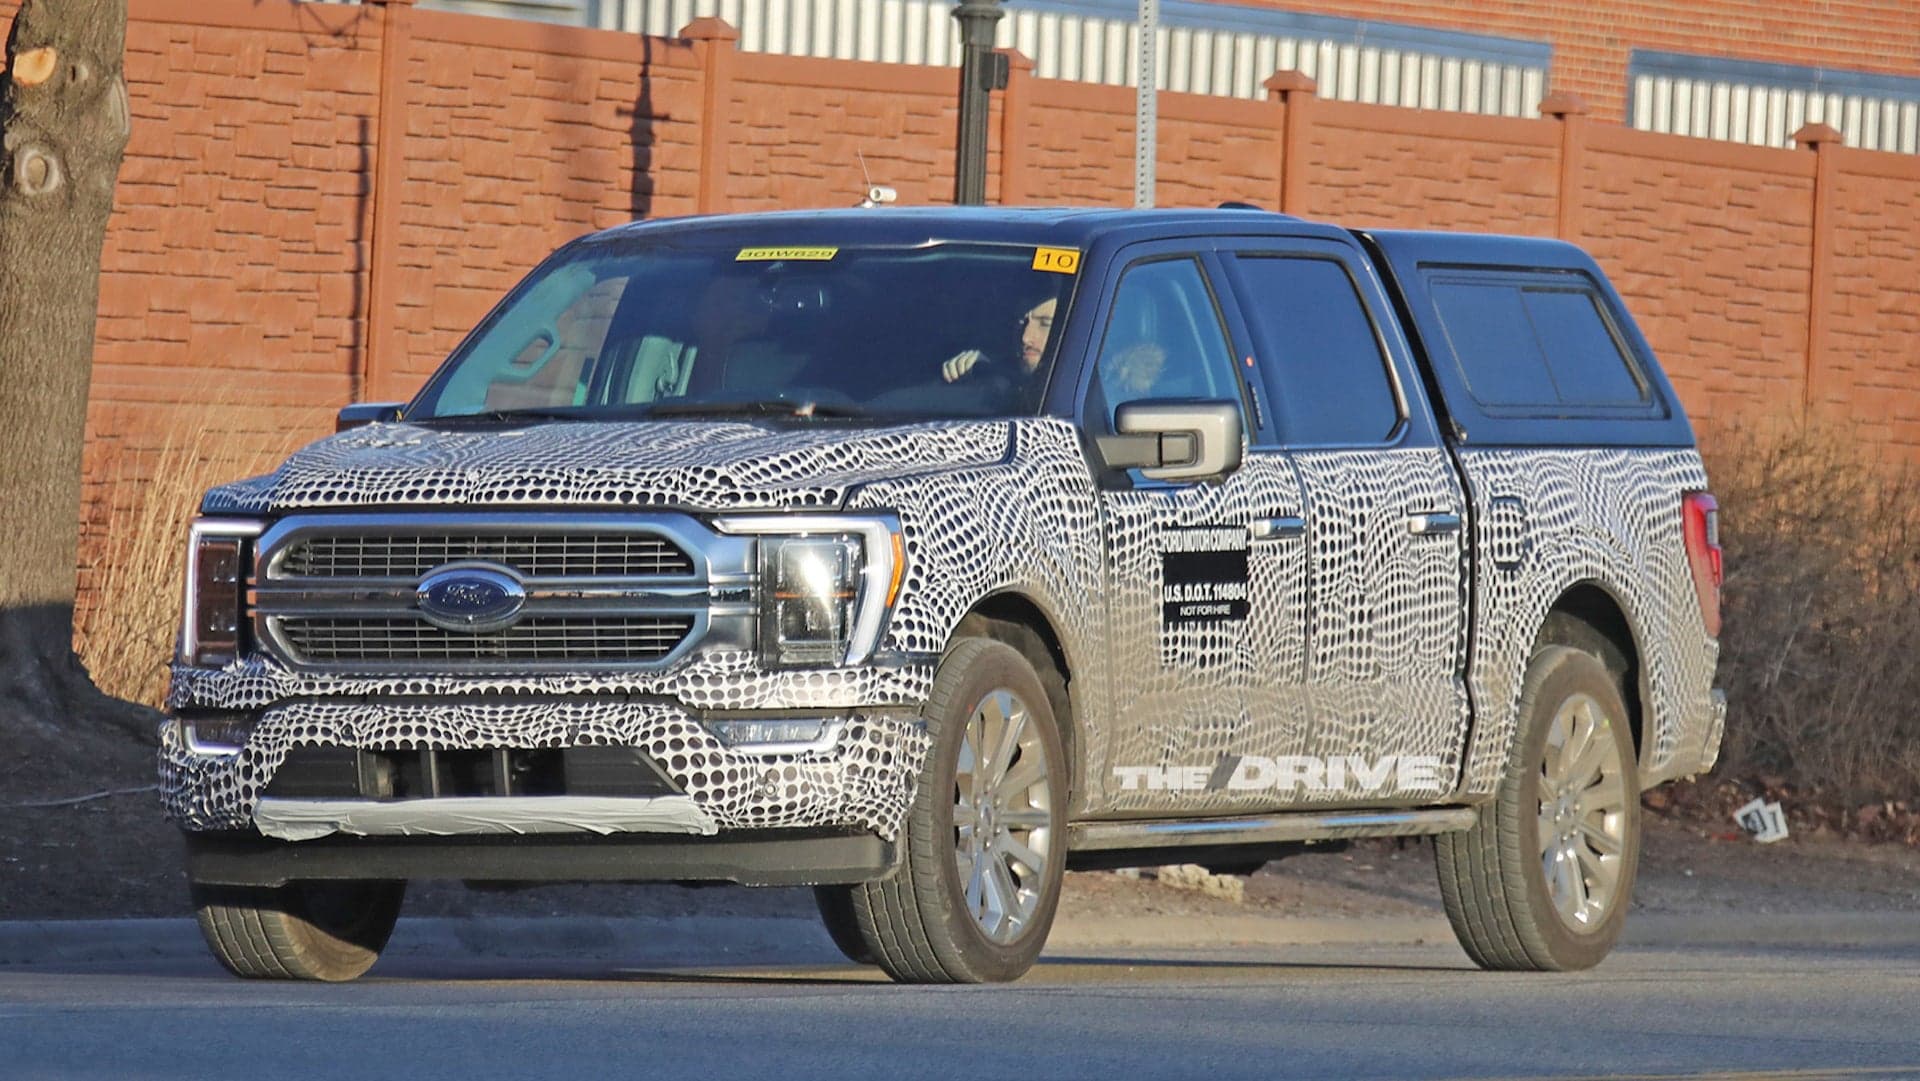 Leaked Details Reveal More About the 2021 Ford F-150